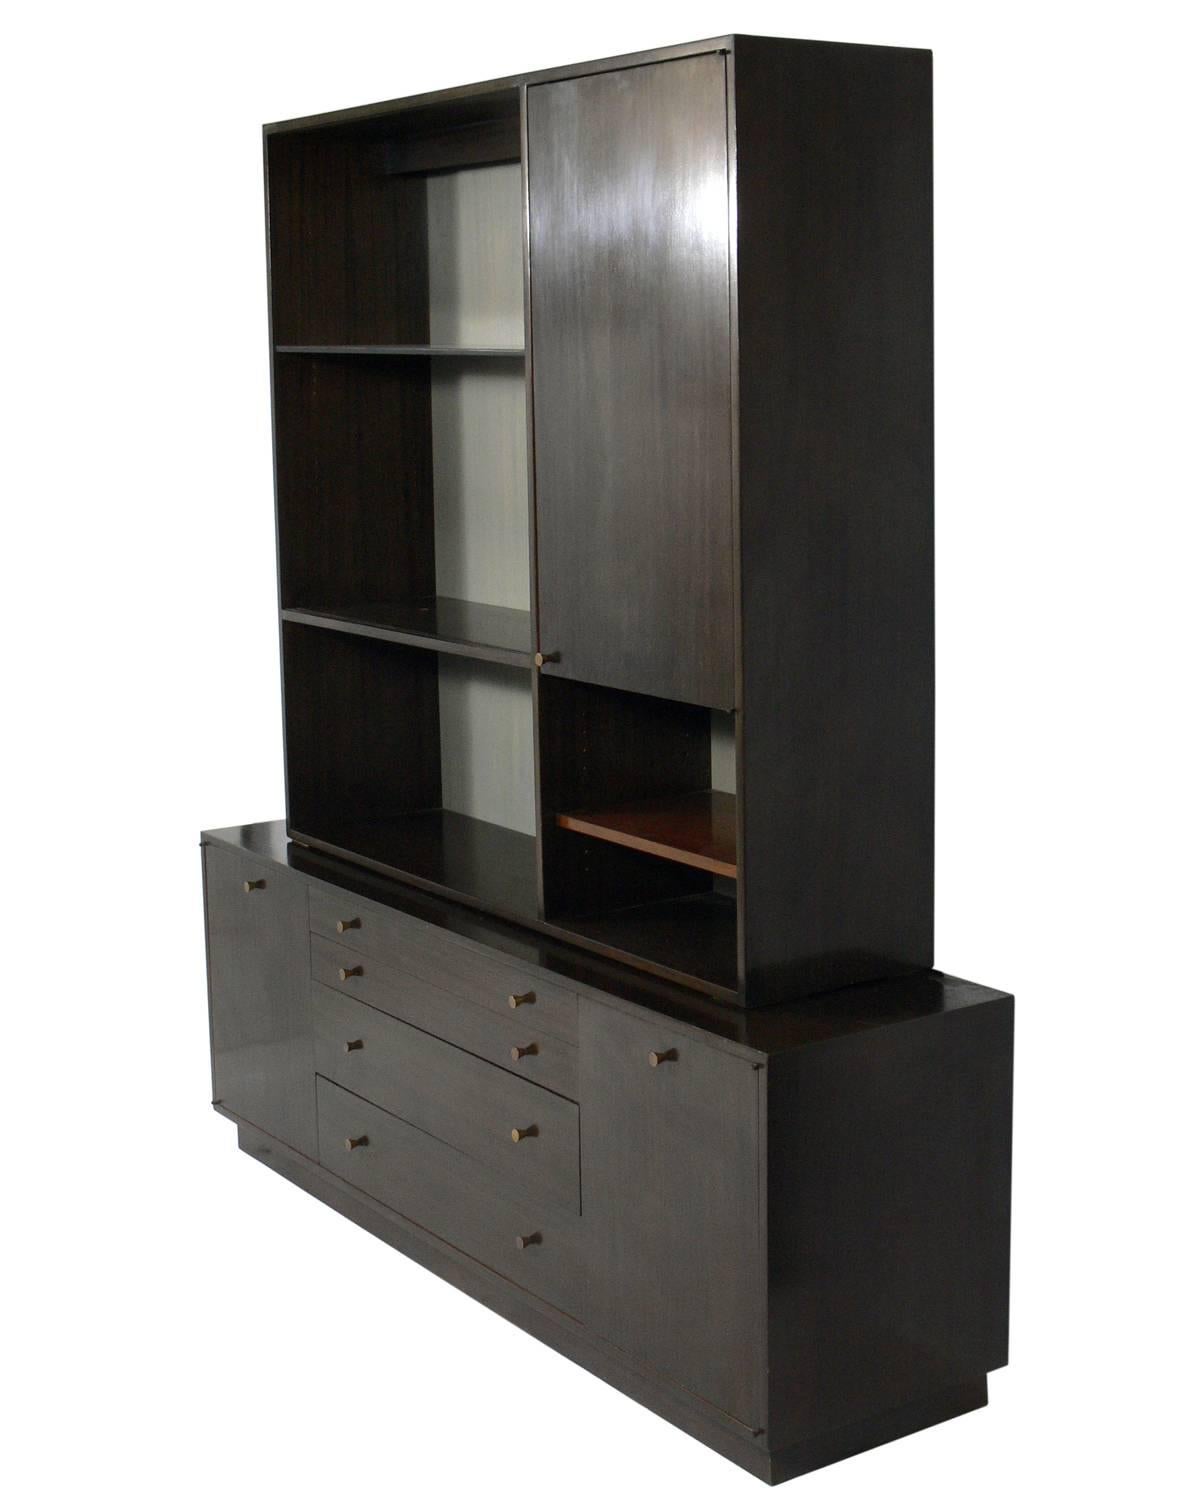 Elegant two-part cabinet or credenza, designed by Harvey Probber, circa 1960s. This piece is a versatile size and can be used as a vitrine, display cabinet, credenza, bar, or bookshelf in a living area, or as a chest or dresser in a bedroom. It